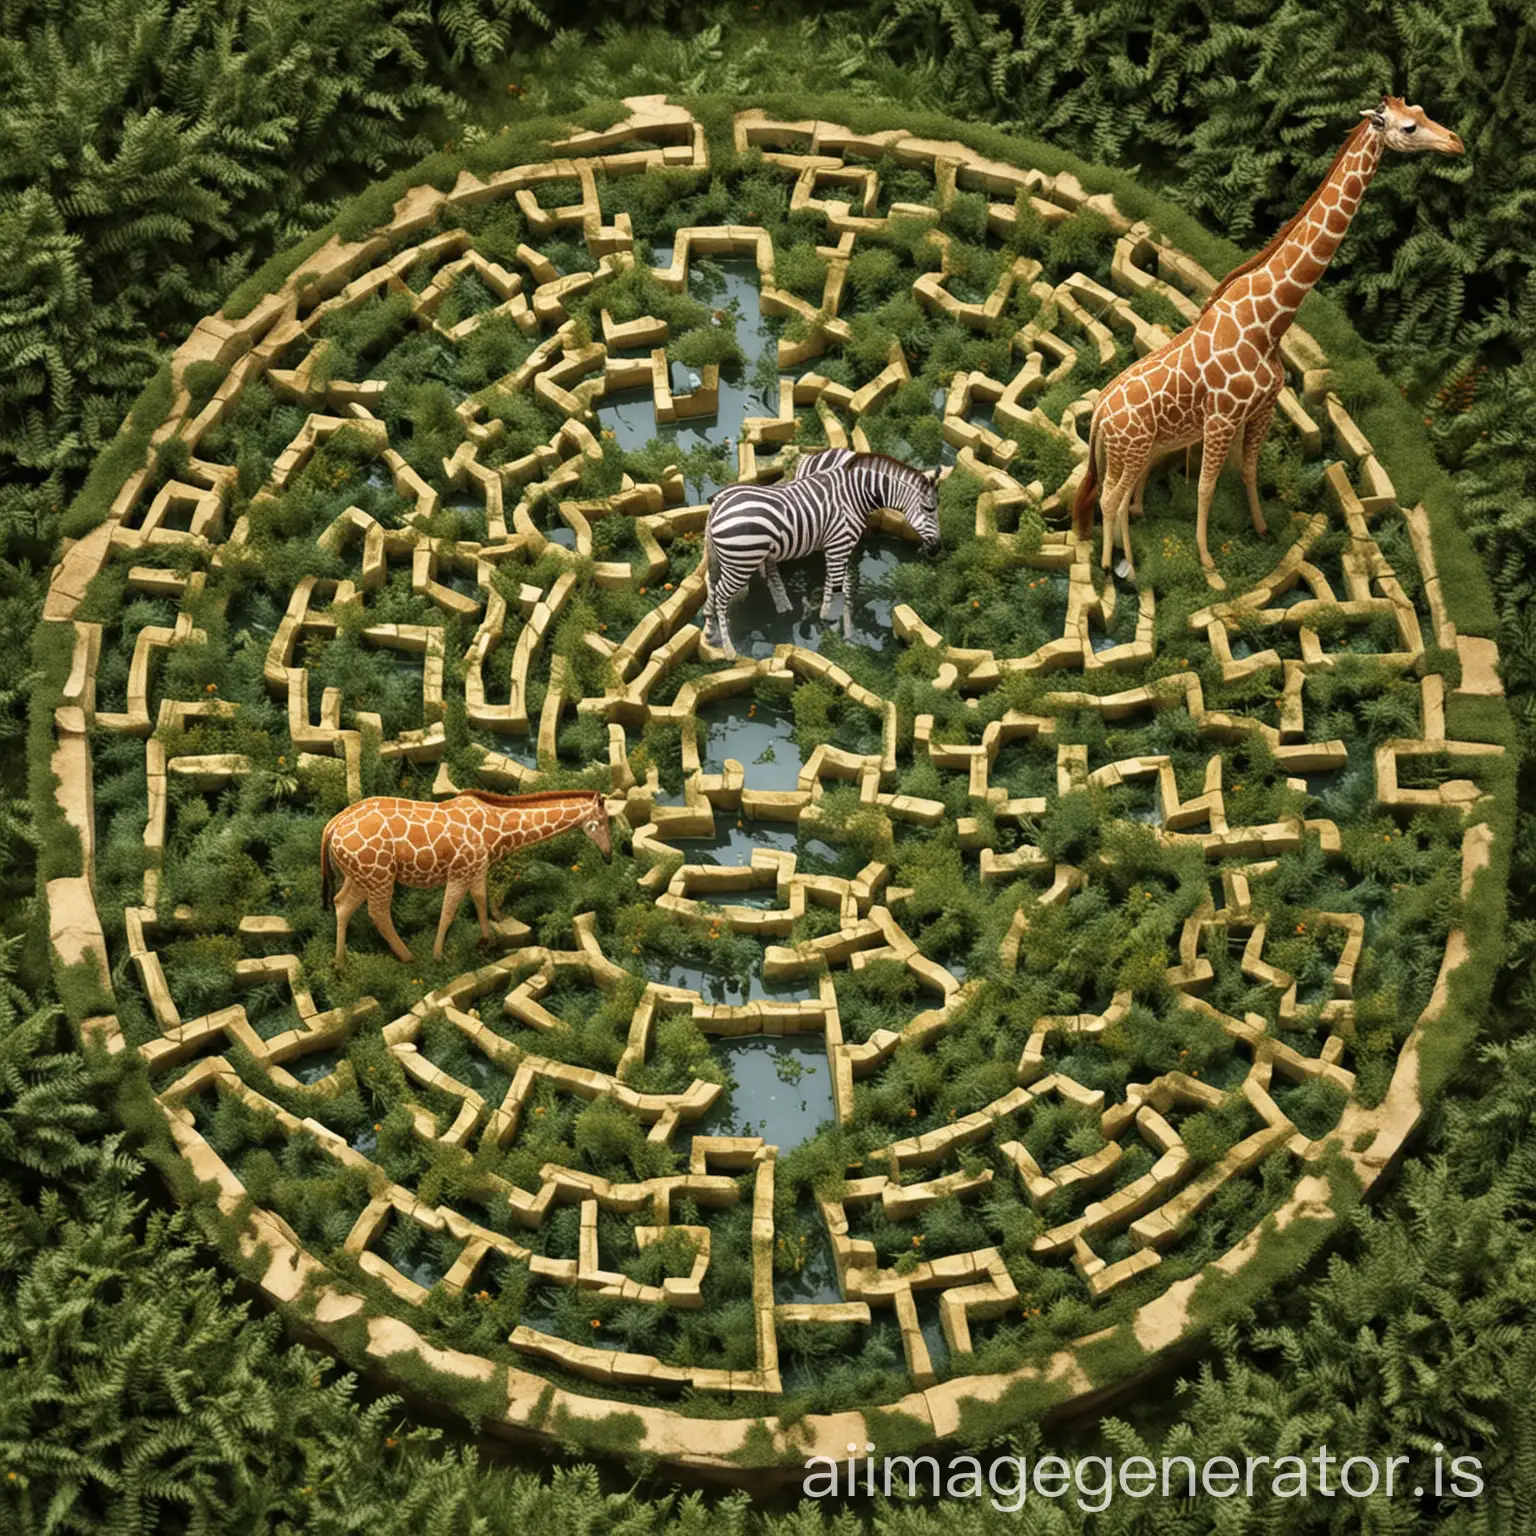 Create an intricate maze based on a children’s story book where 2 sisters must reach a freshwater spring. Within the Story is a Giraffe, a Zebra, an Antelope, an Elephant and an Ostrich. The story is based in a savannah with acacia trees and hills